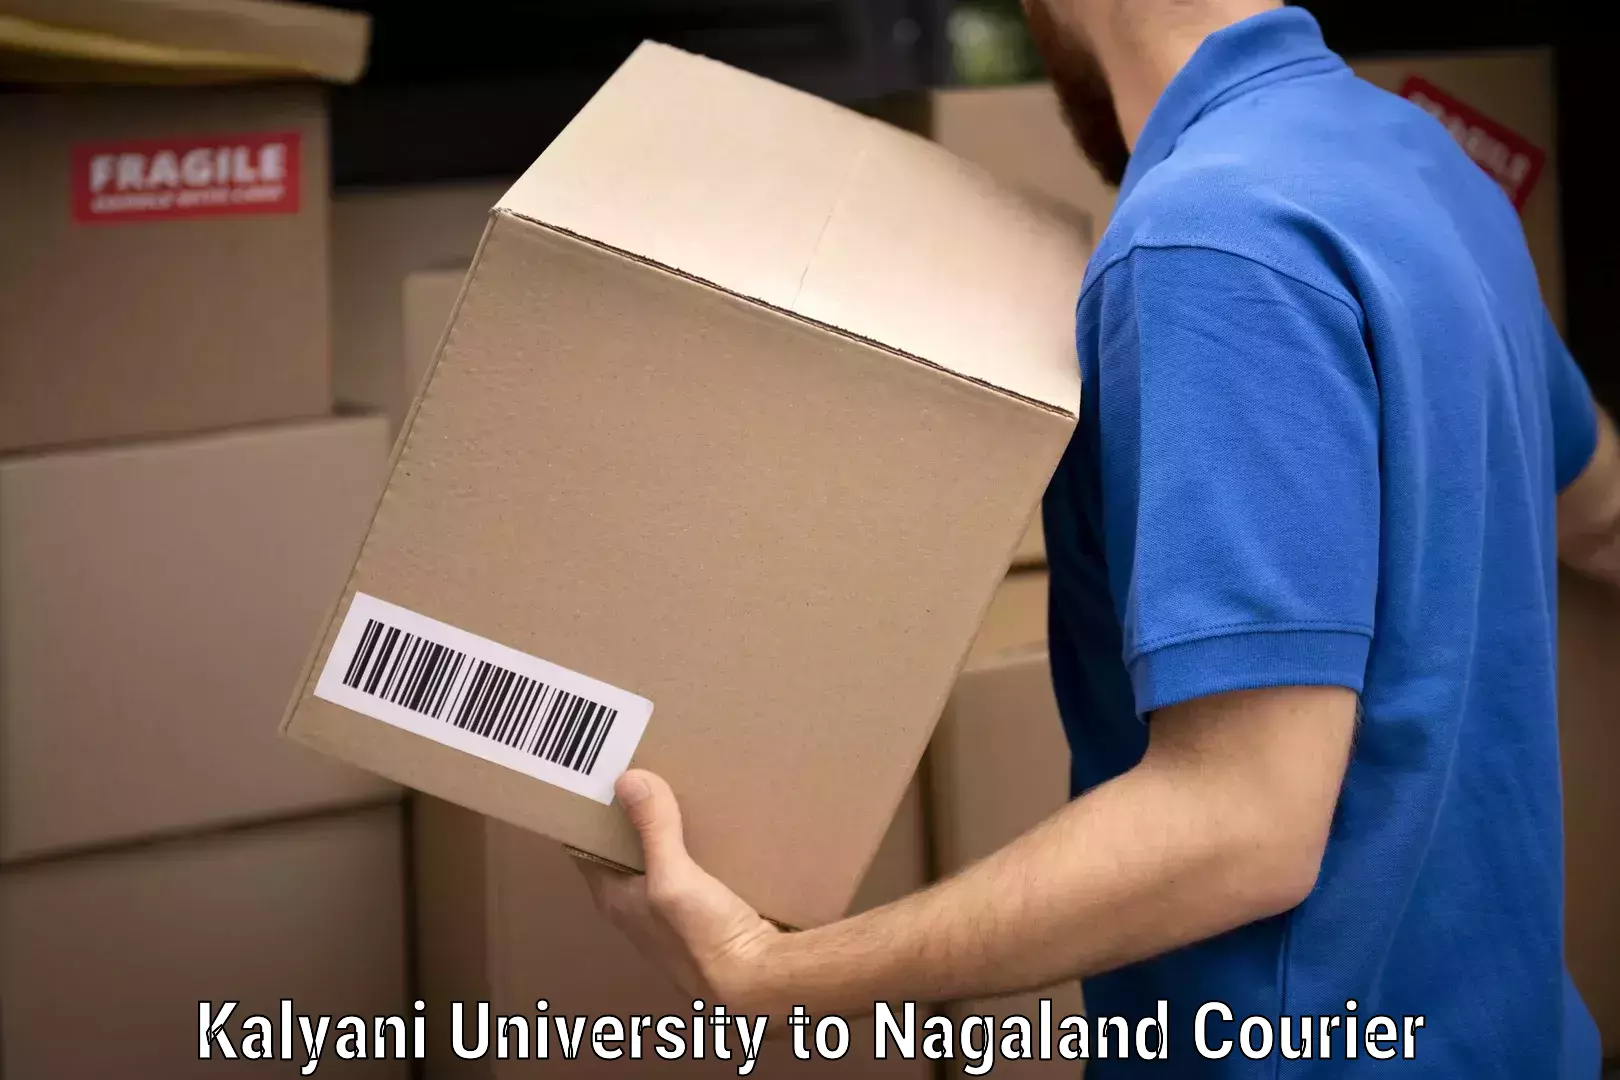 Furniture relocation services in Kalyani University to Nagaland